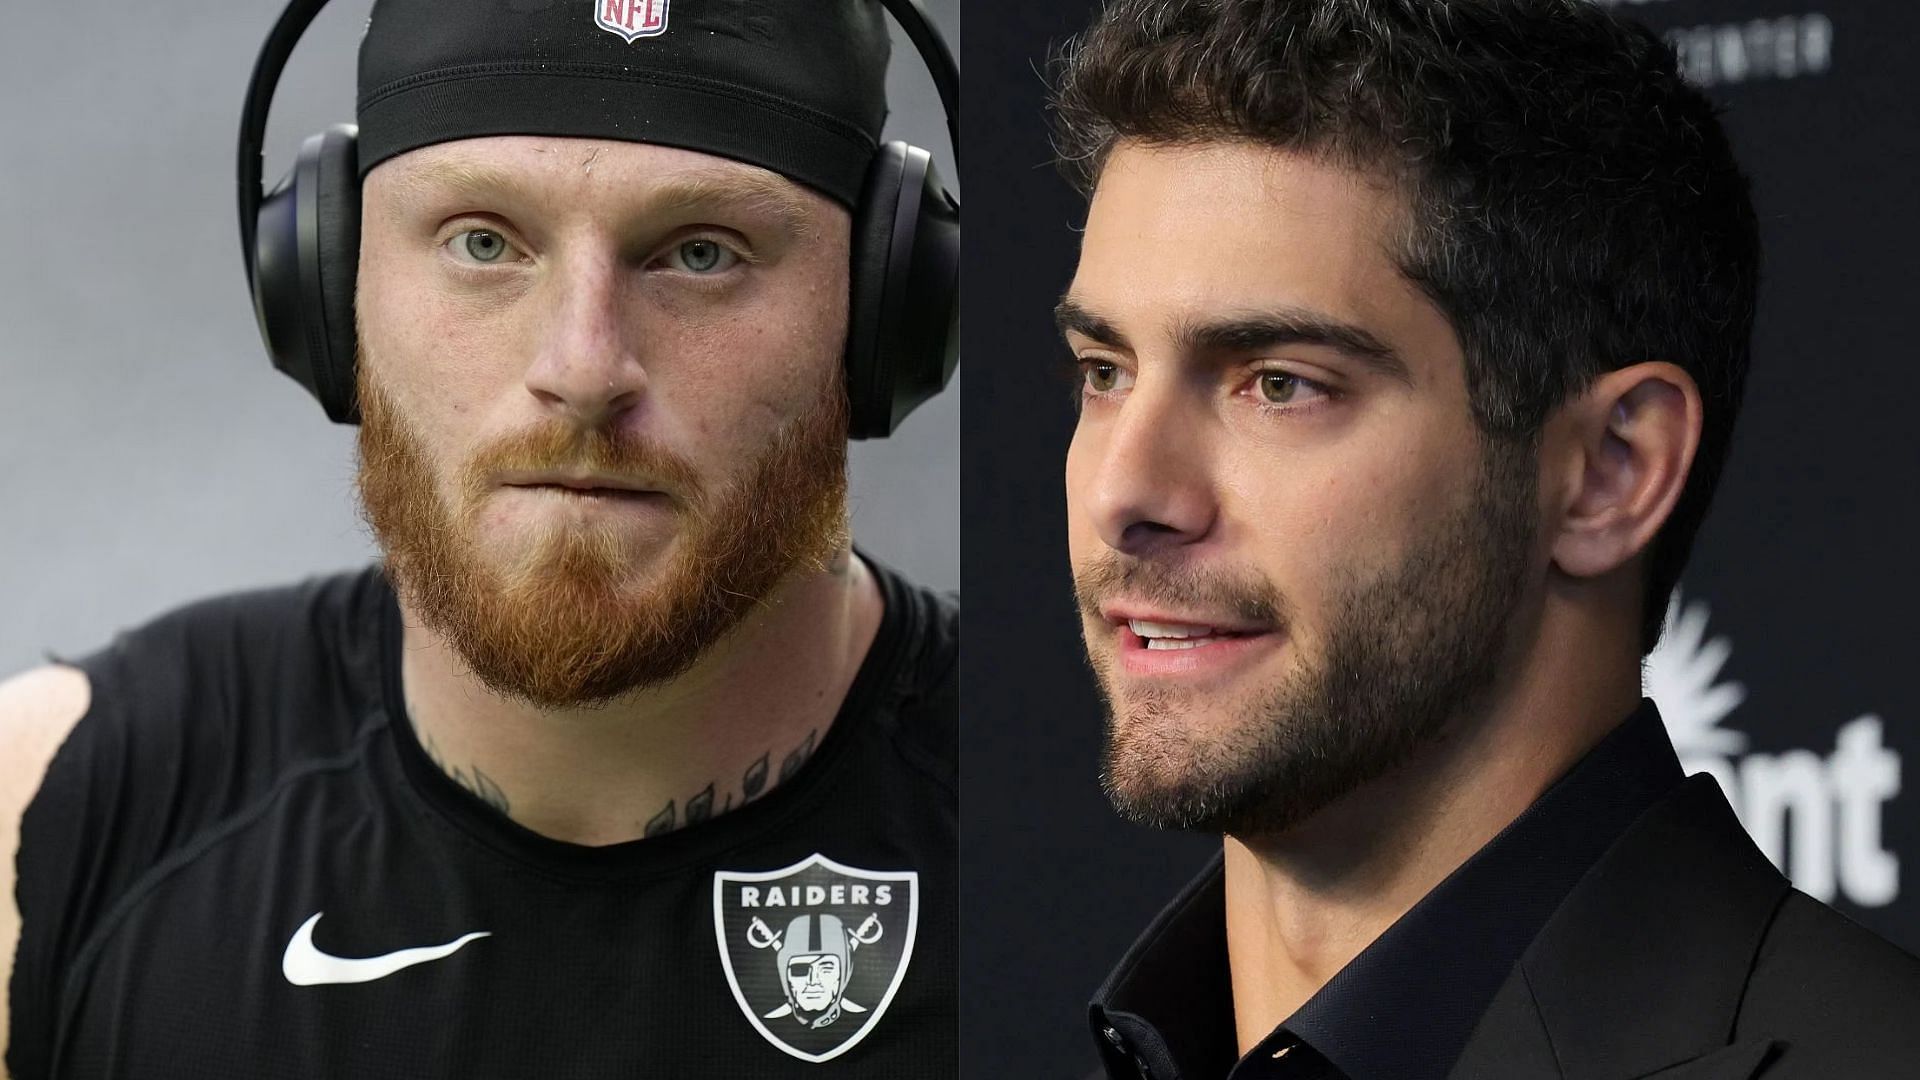 Things got heated up between Maxx Crosby and Jimmy Garoppolo in one of the Las Vegas Raiders